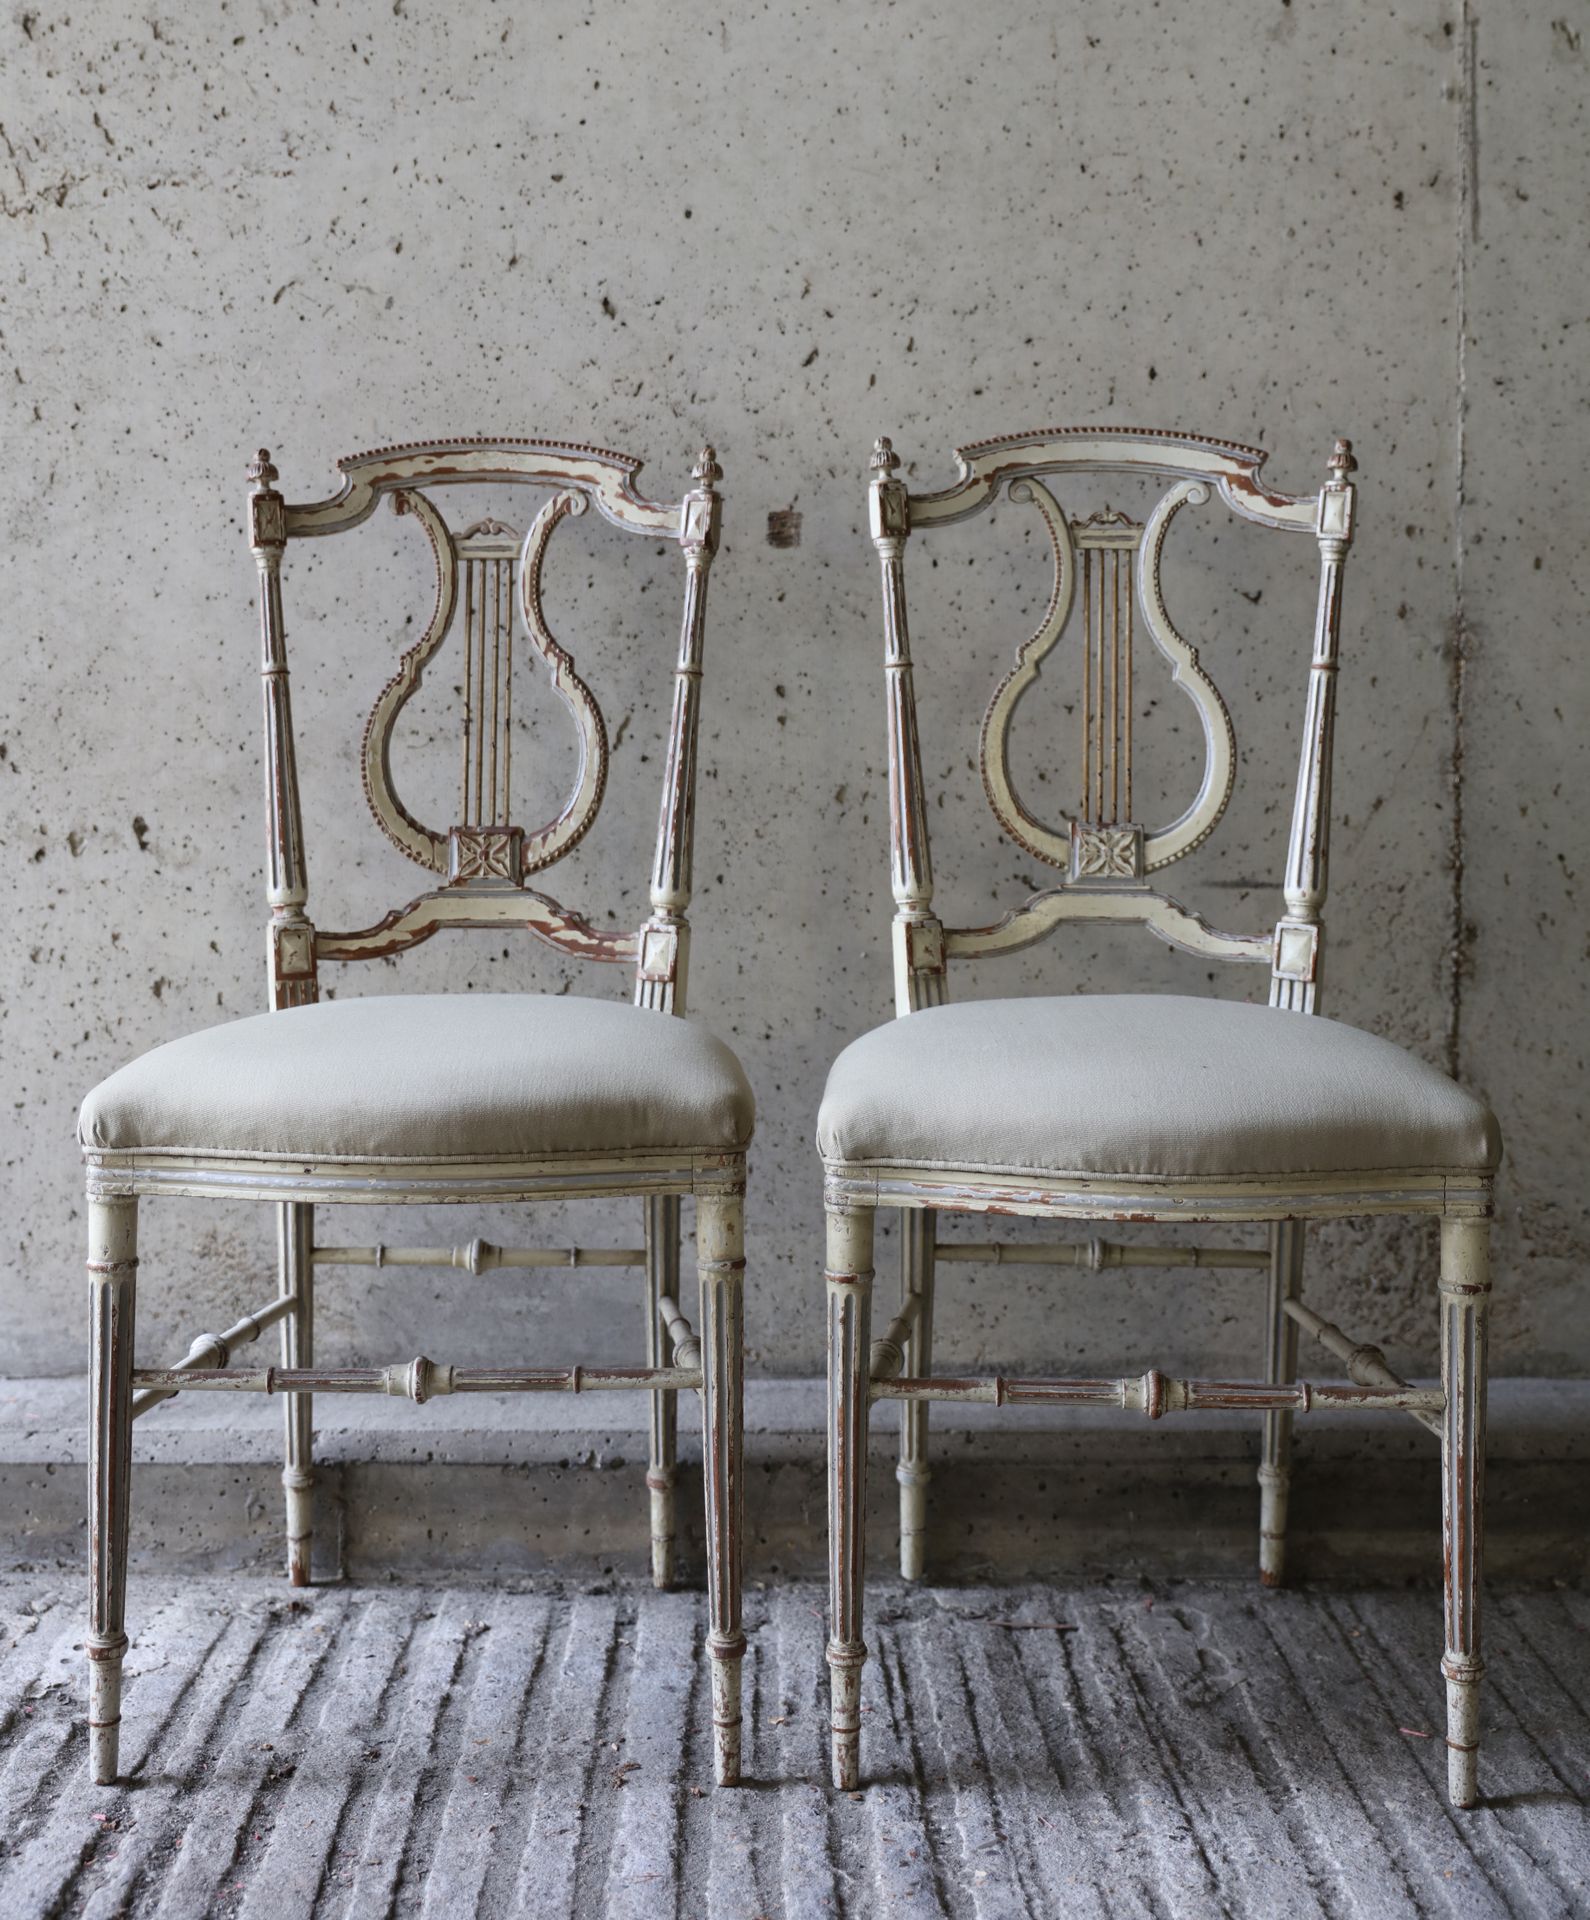 VARIA Pair of chairs in Louis XVI style, back in the form of a lyre
Paar stoeltj&hellip;